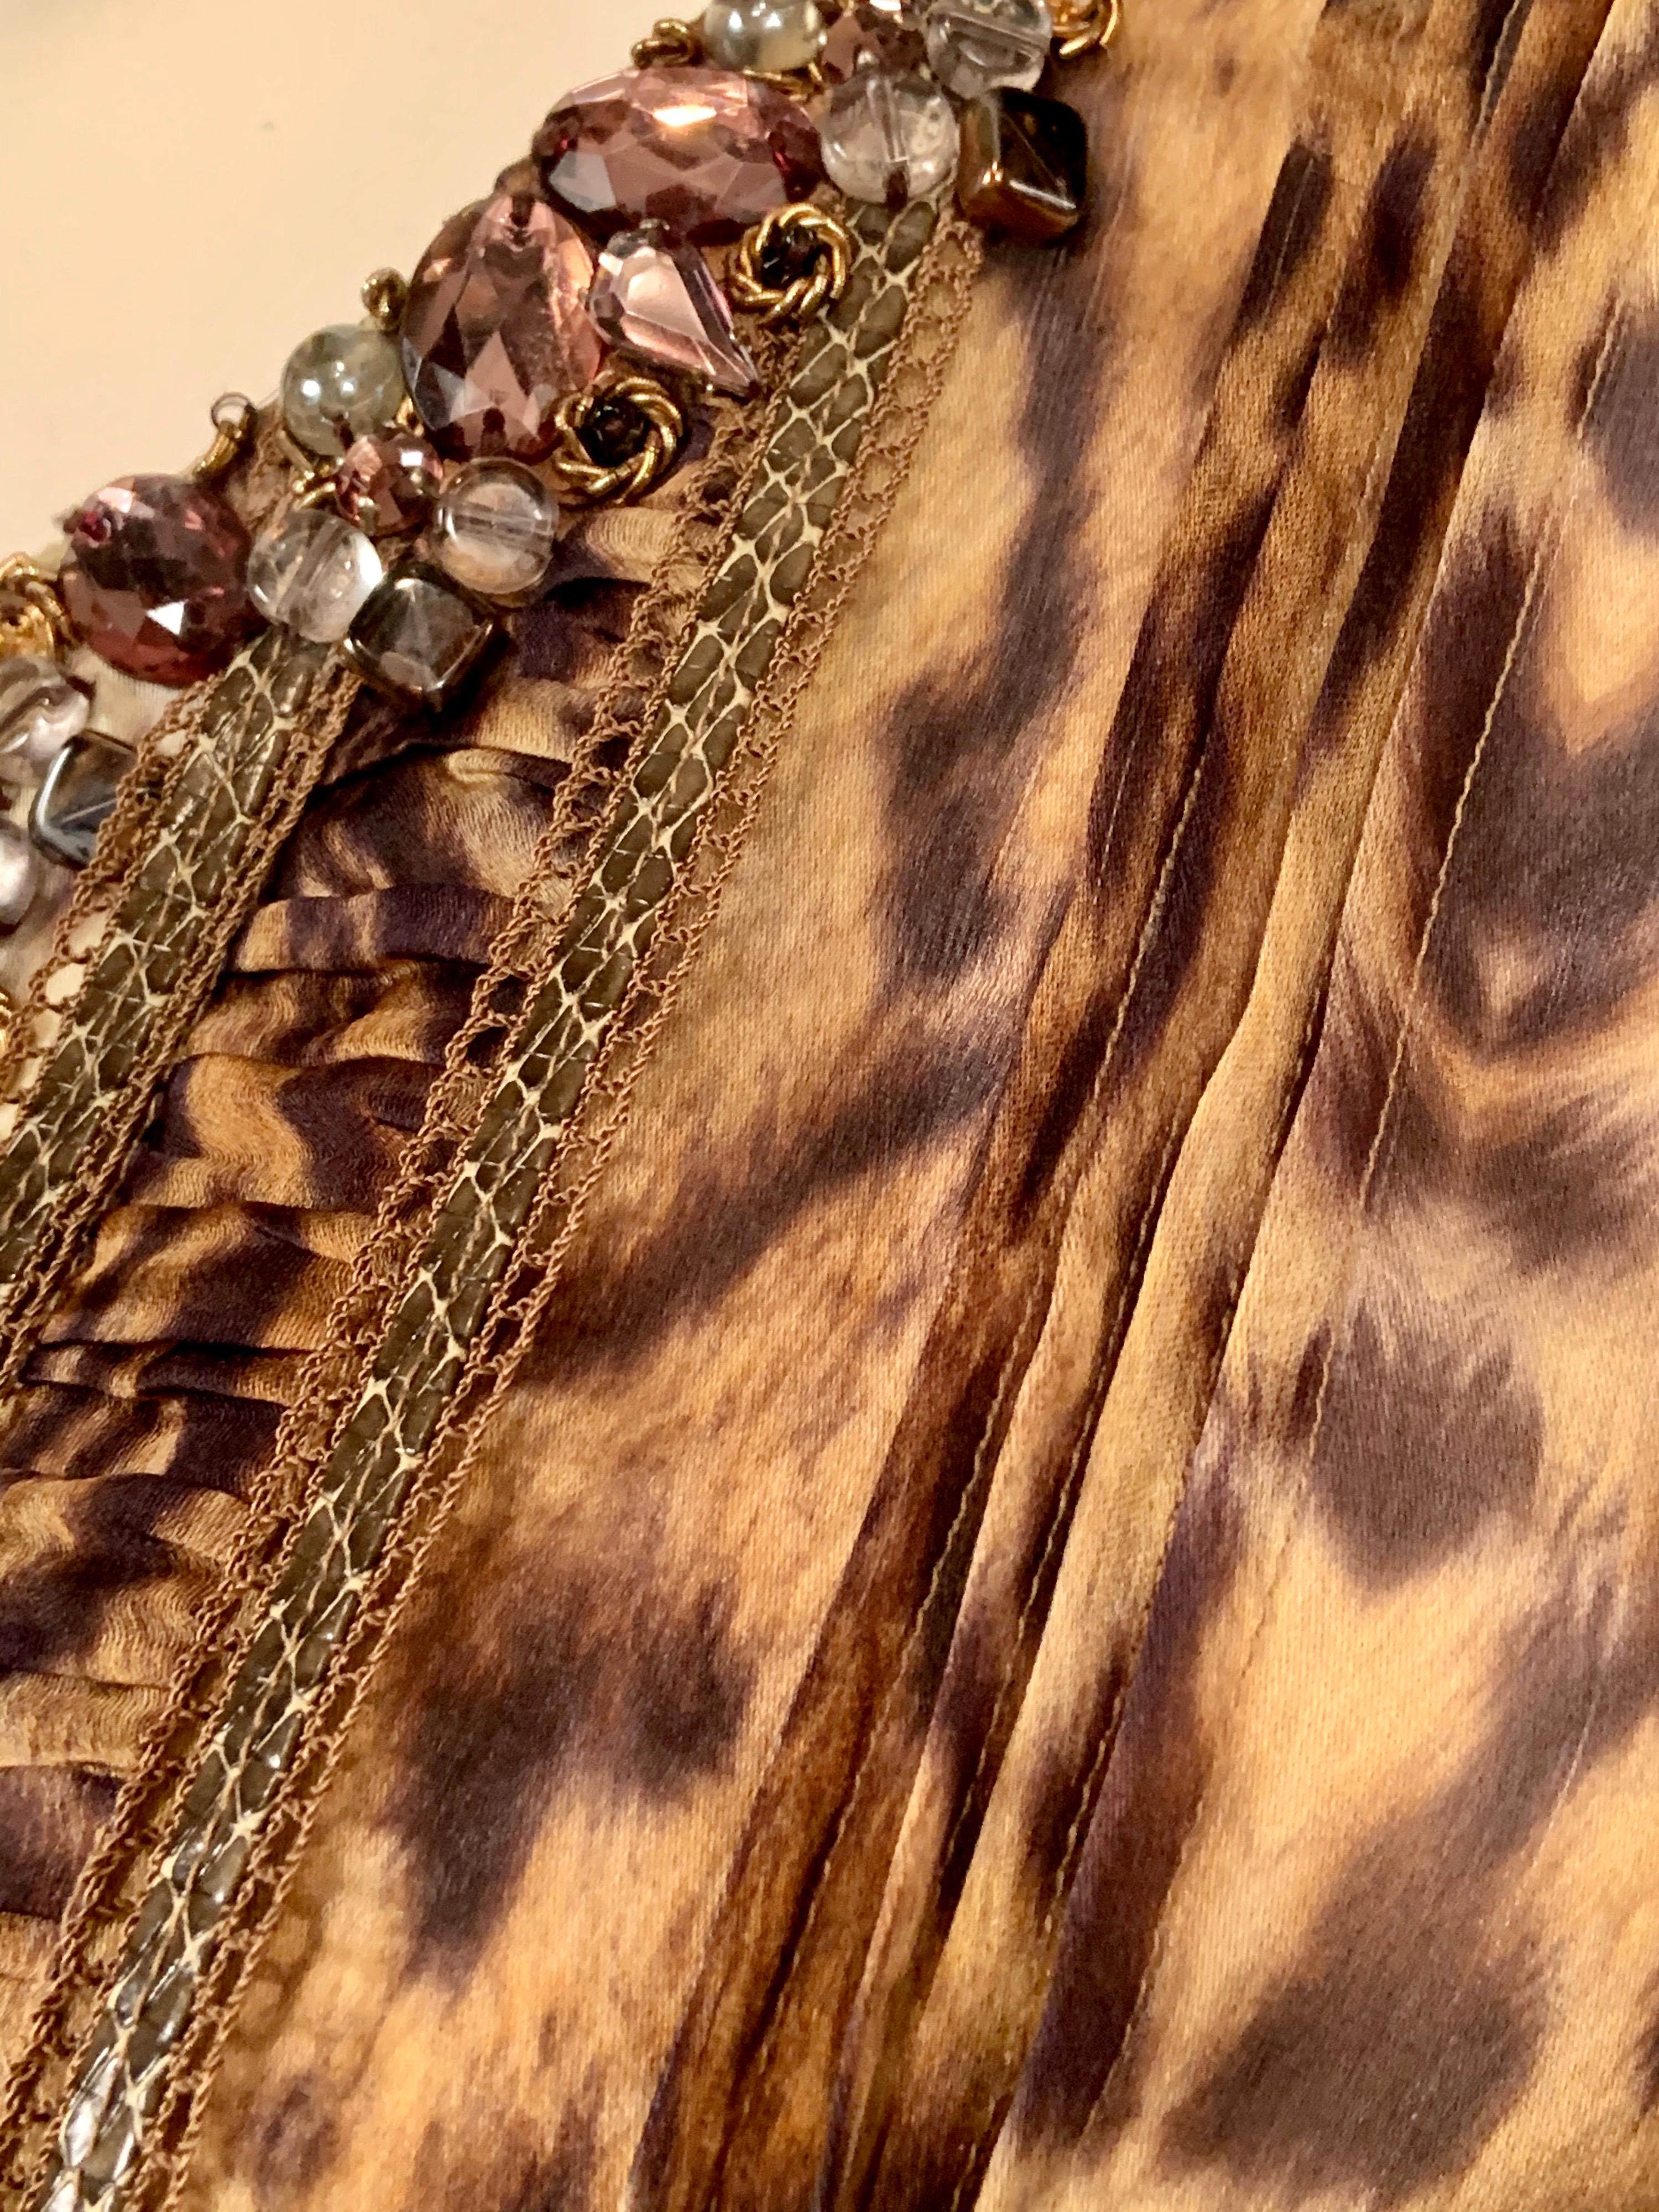 Oscar de la Renta Animal Print Silk Chiffon Blouse Jewels, Snakeskin, Pin Tucks In Excellent Condition For Sale In New Hope, PA